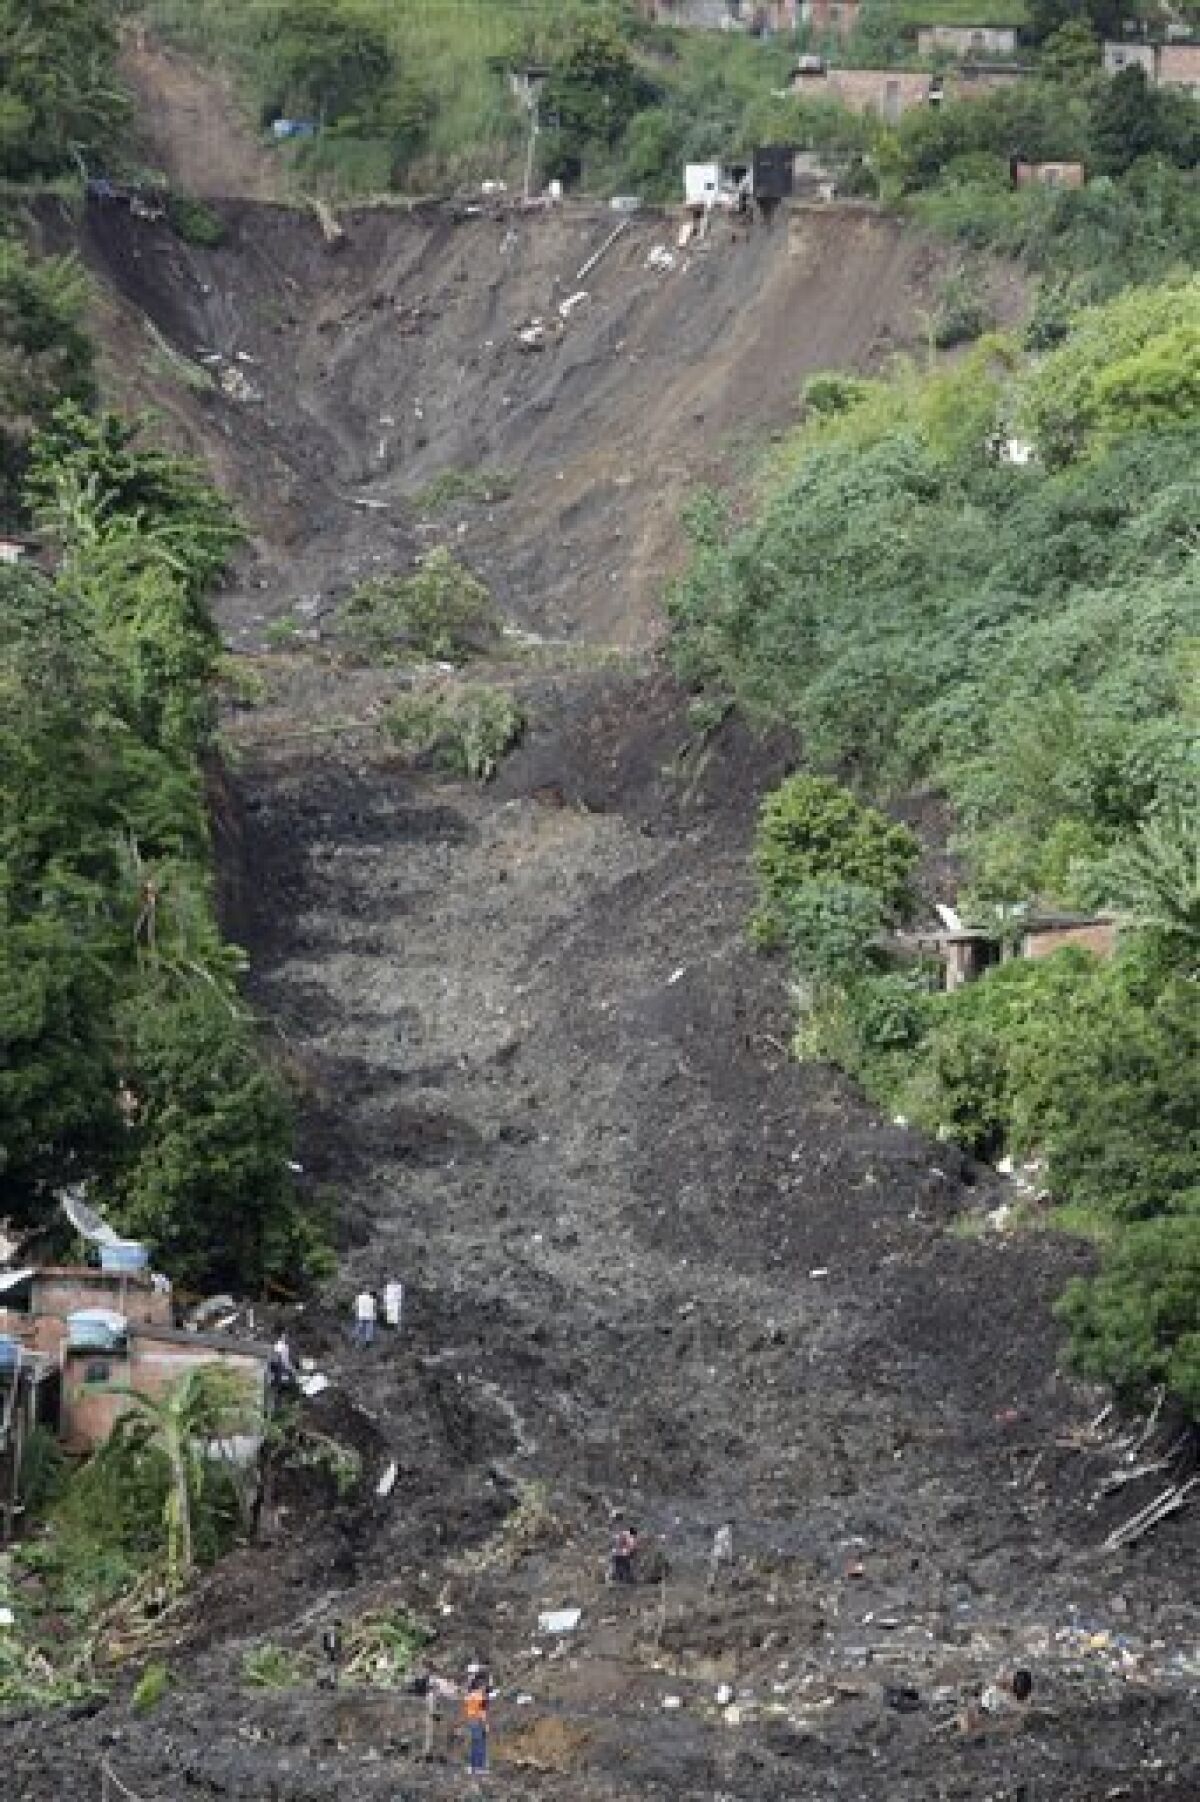 The Morro do Bumba area where a landslide buried homes is seen in the Niteroi neighborhood of Rio de Janeiro, Thursday, April 8, 2010. At least 200 people were buried and feared dead under the latest landslide to hit a slum in Rio de Janeiro's metropolitan area, authorities said Thursday. (AP Photo/Felipe Dana)